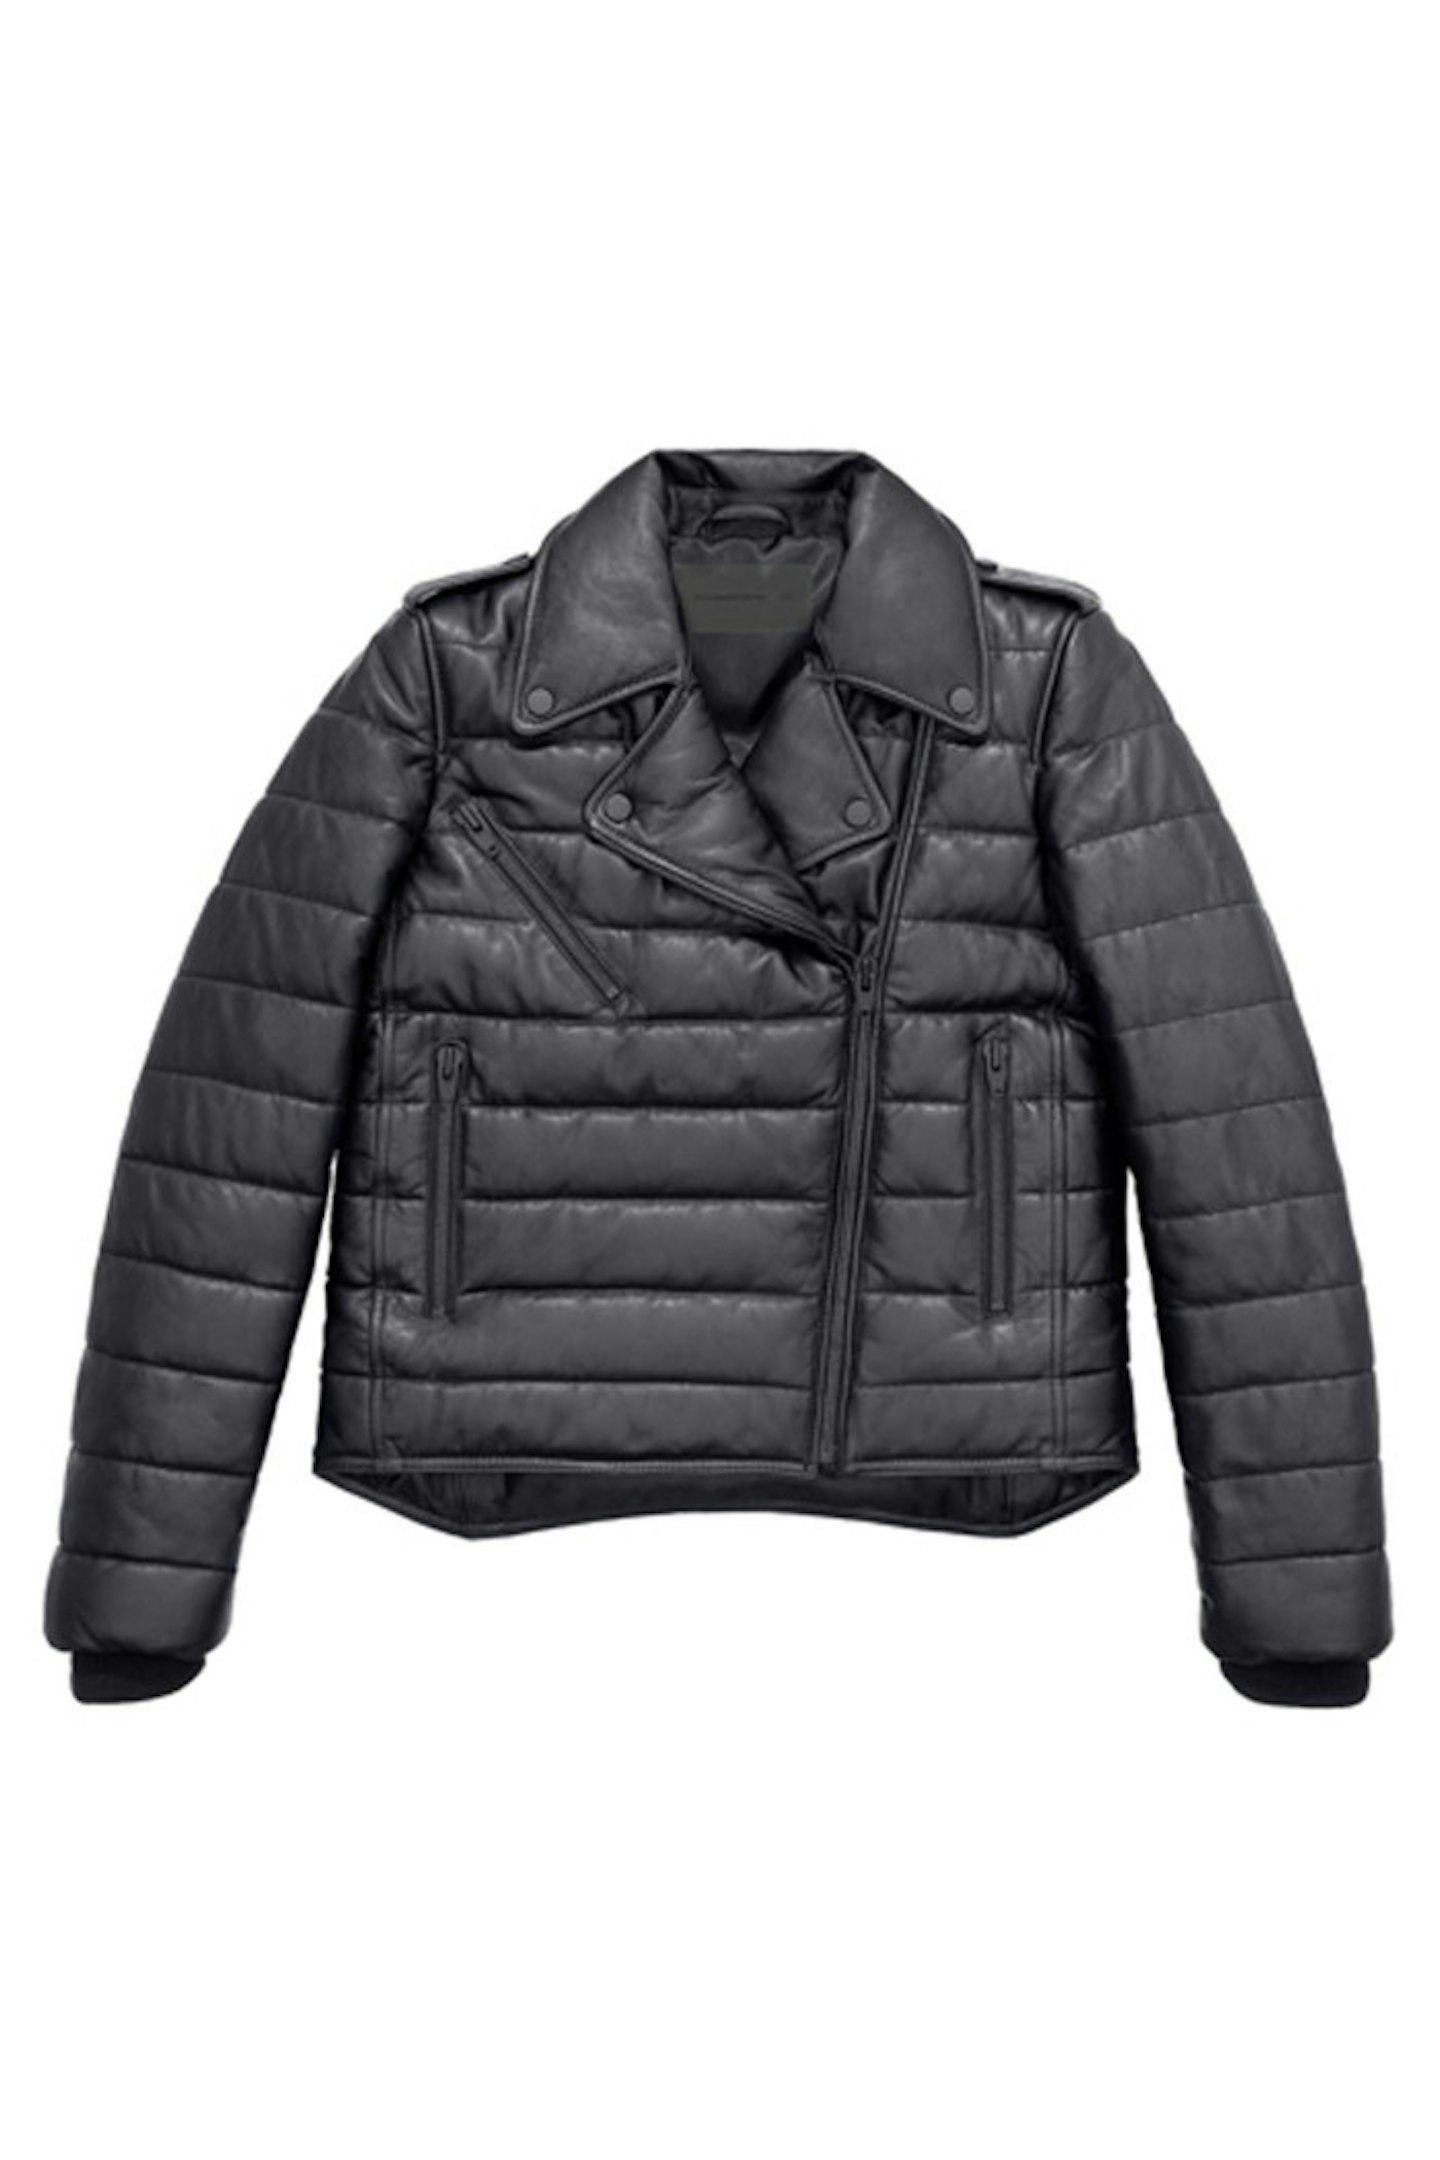 Leather jacket £199.99 by Alexander Wang x H&M